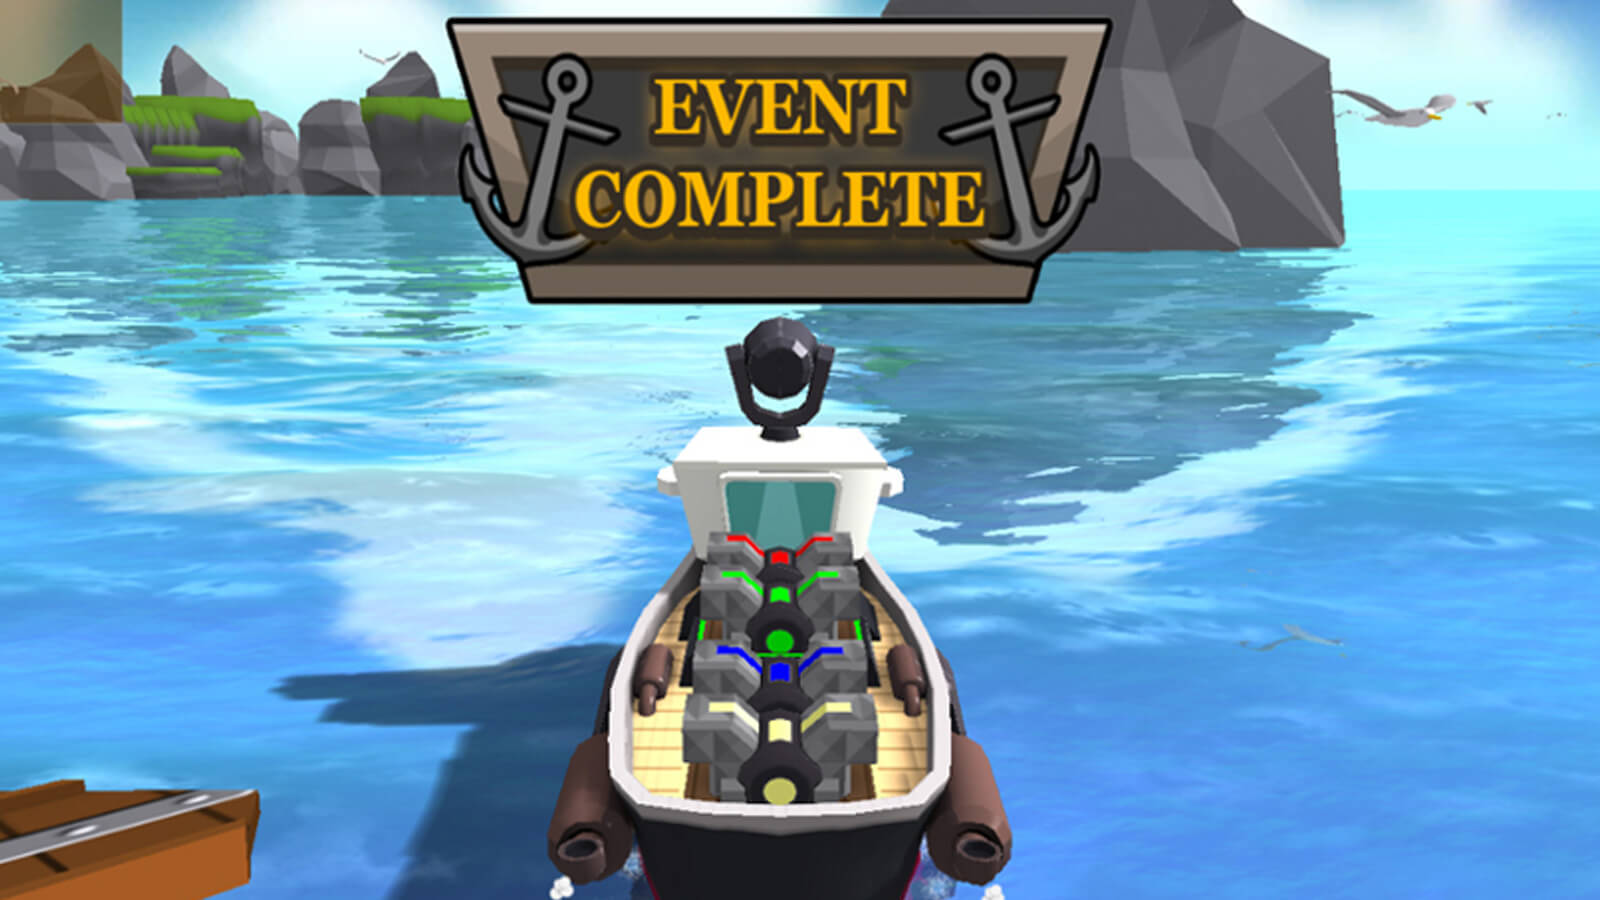 The players' boat seen from behind sailing towards an anchor graphic reading "Event Complete"